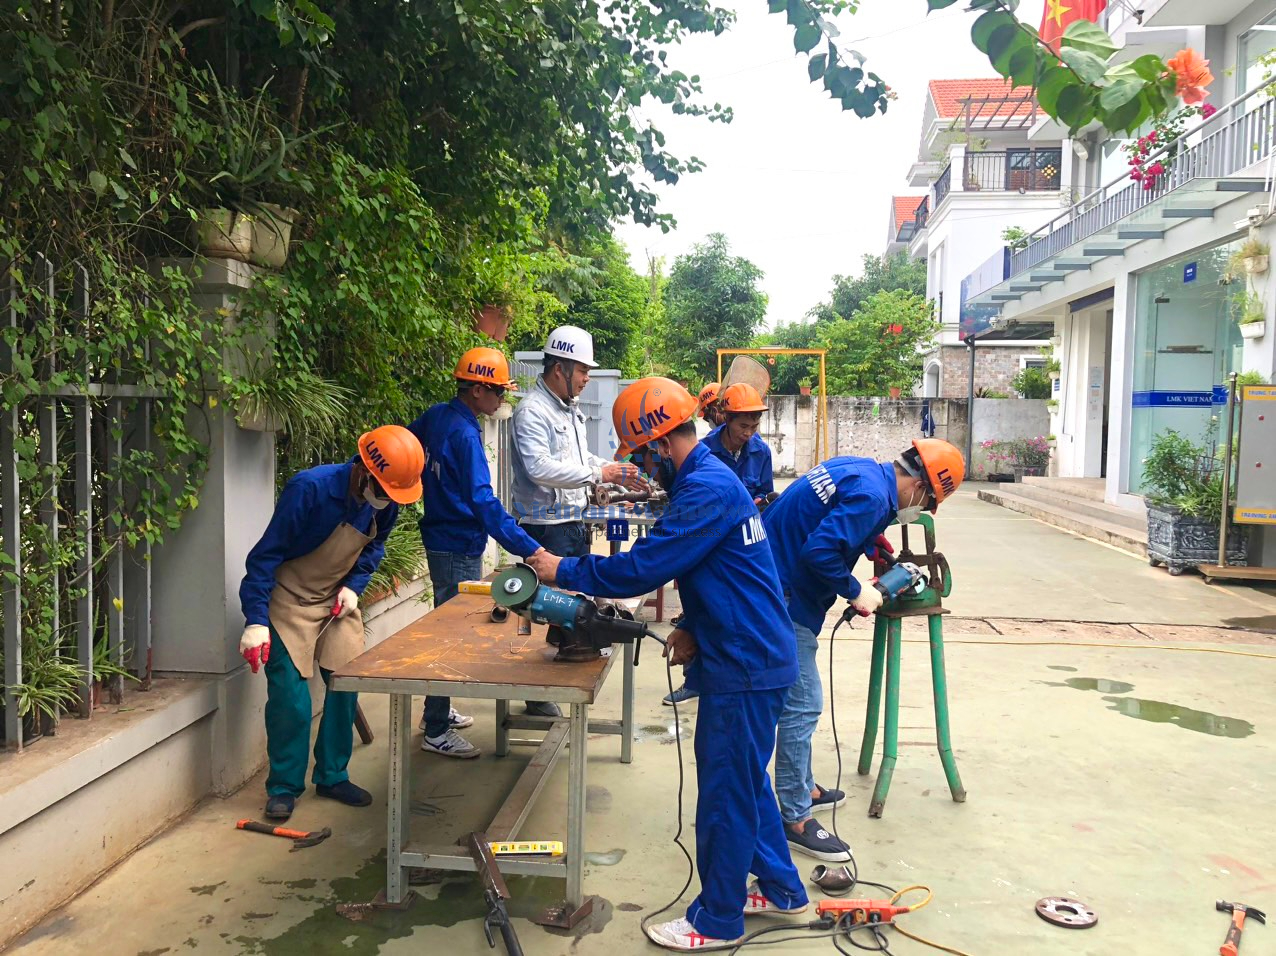 Company in Romania received quality workforce from Vietnam Manpower